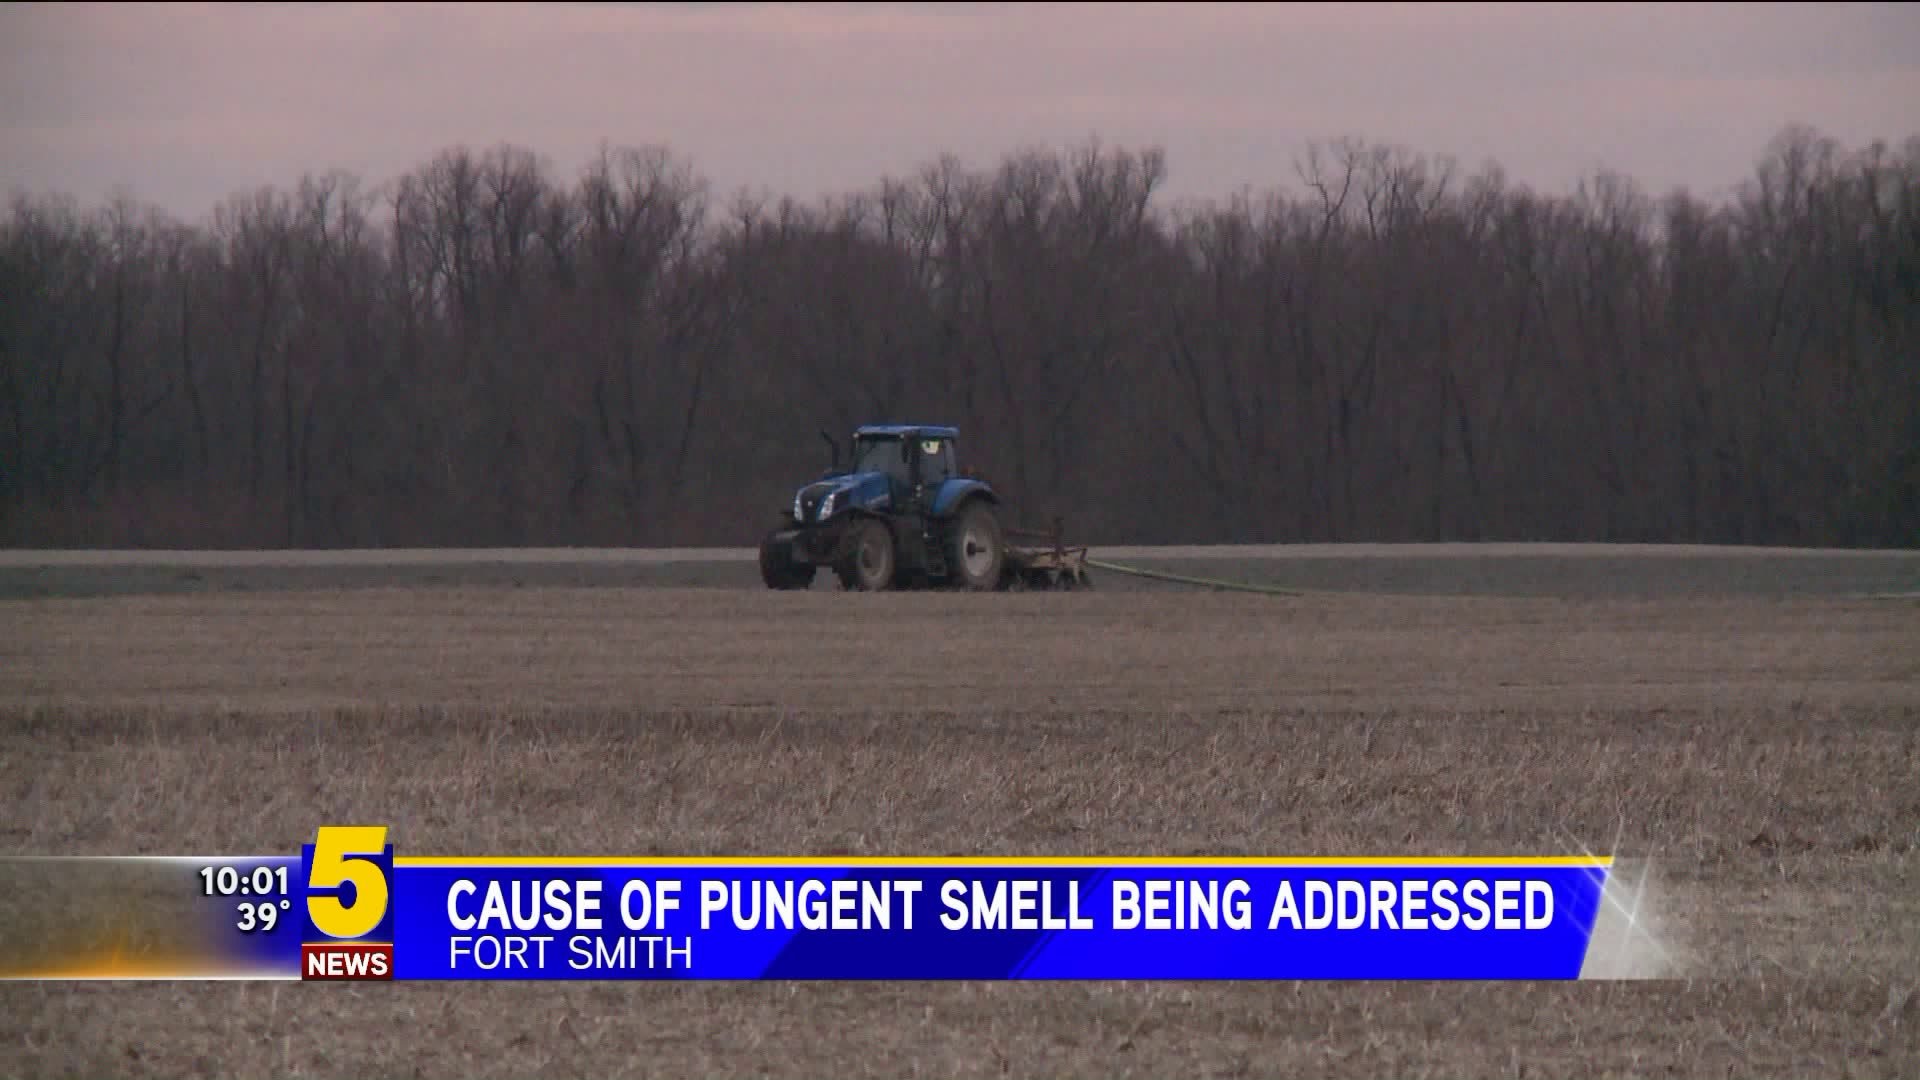 Cause of Pungent Smell in Fort Smith Addressed